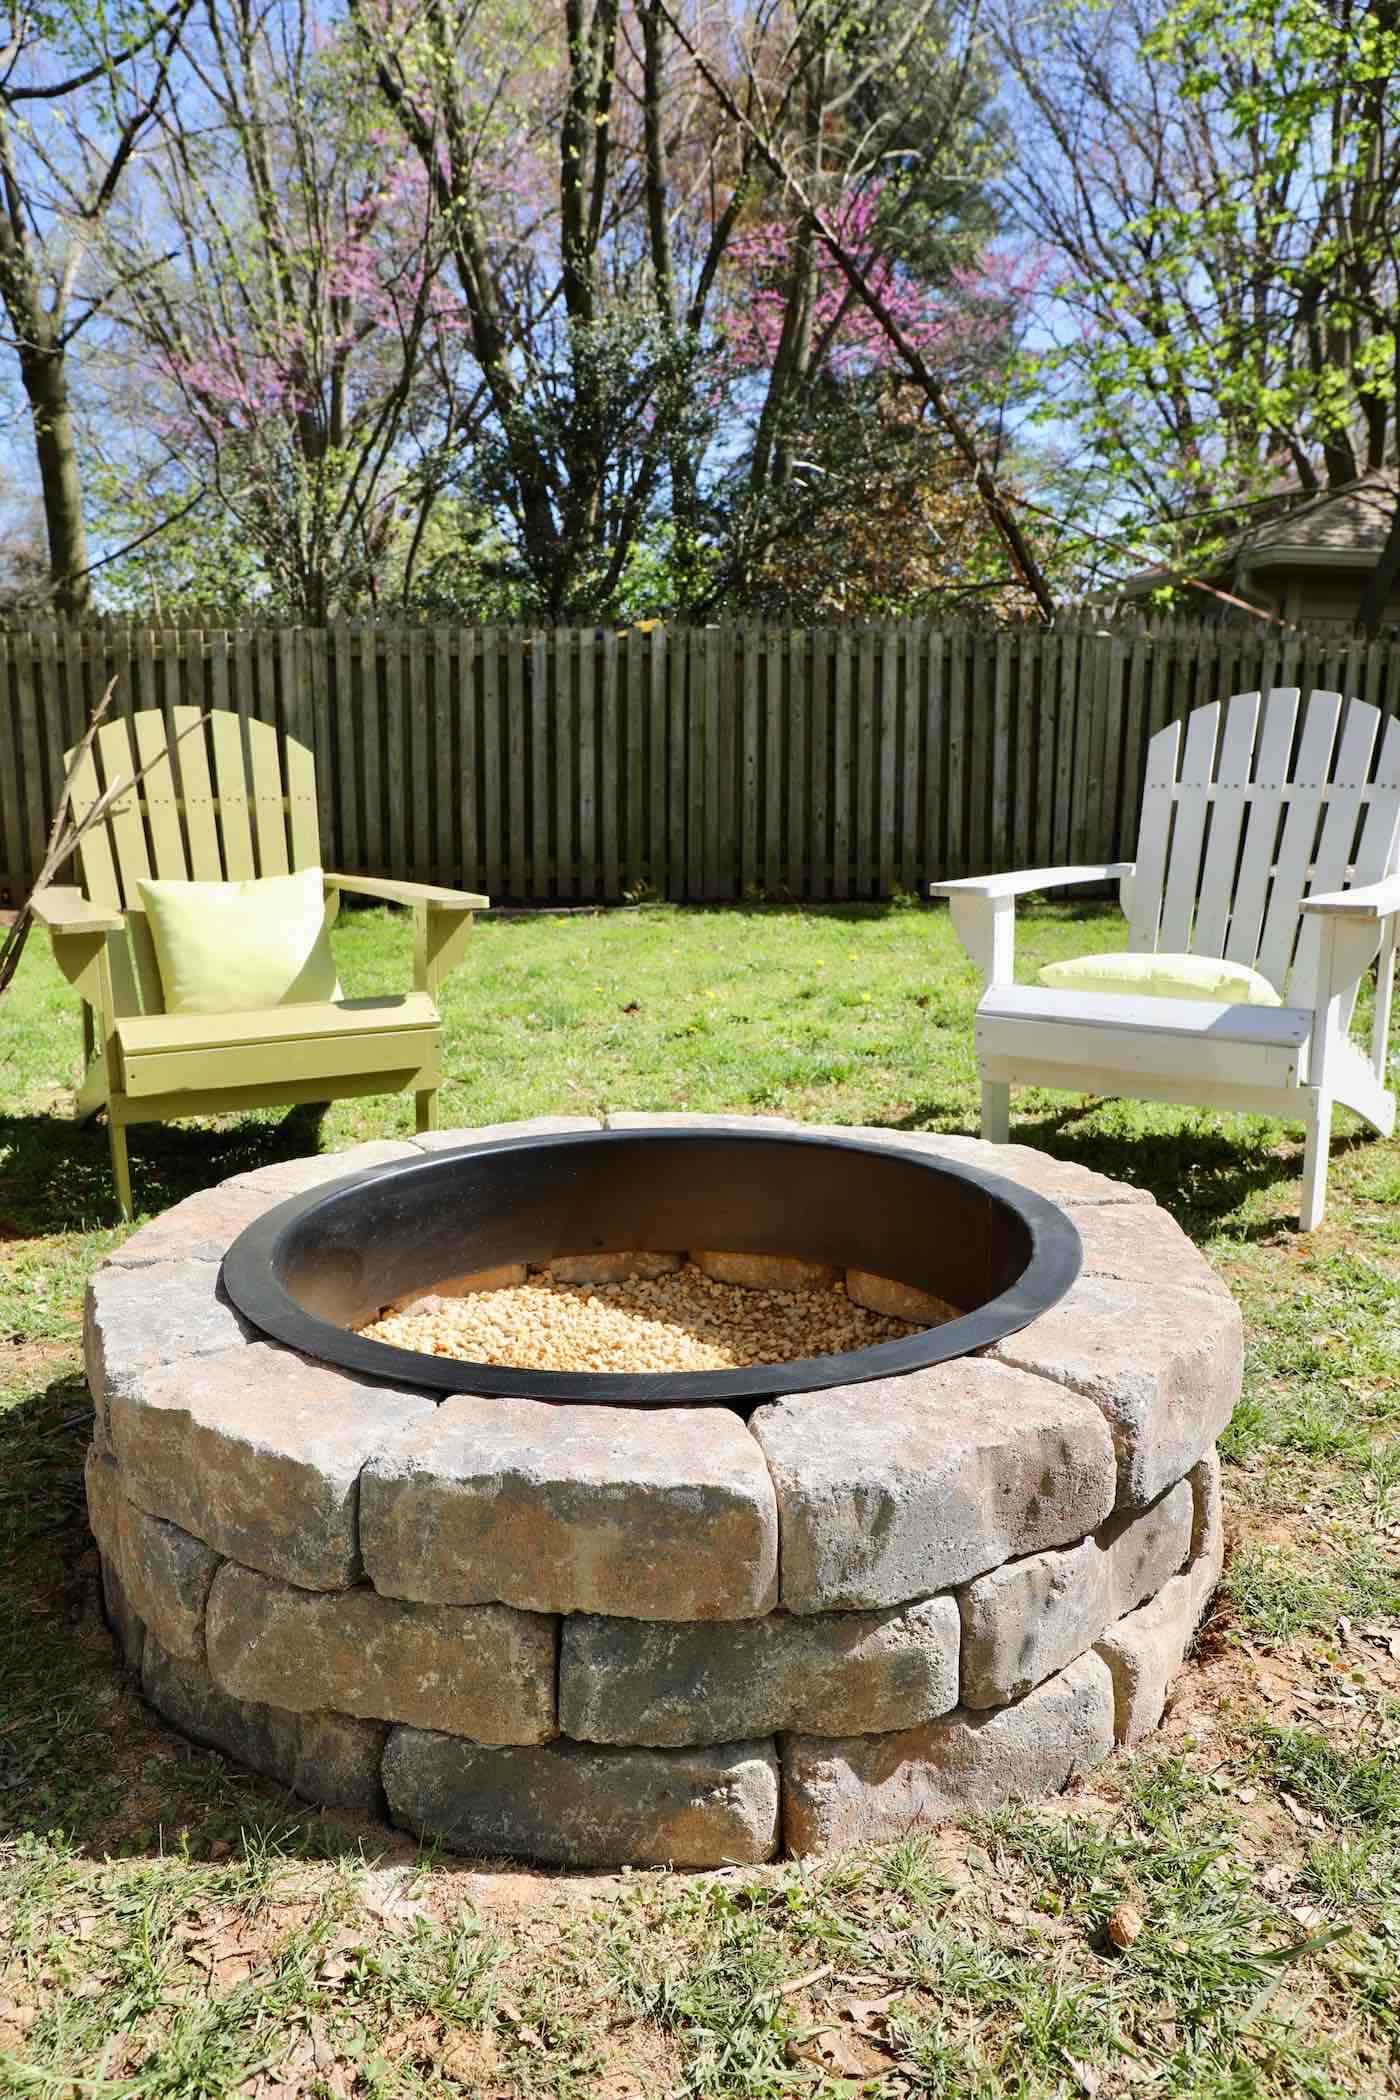 Diy Fire Pit With Gravel Stones, How To Build A Garden Fire Pit